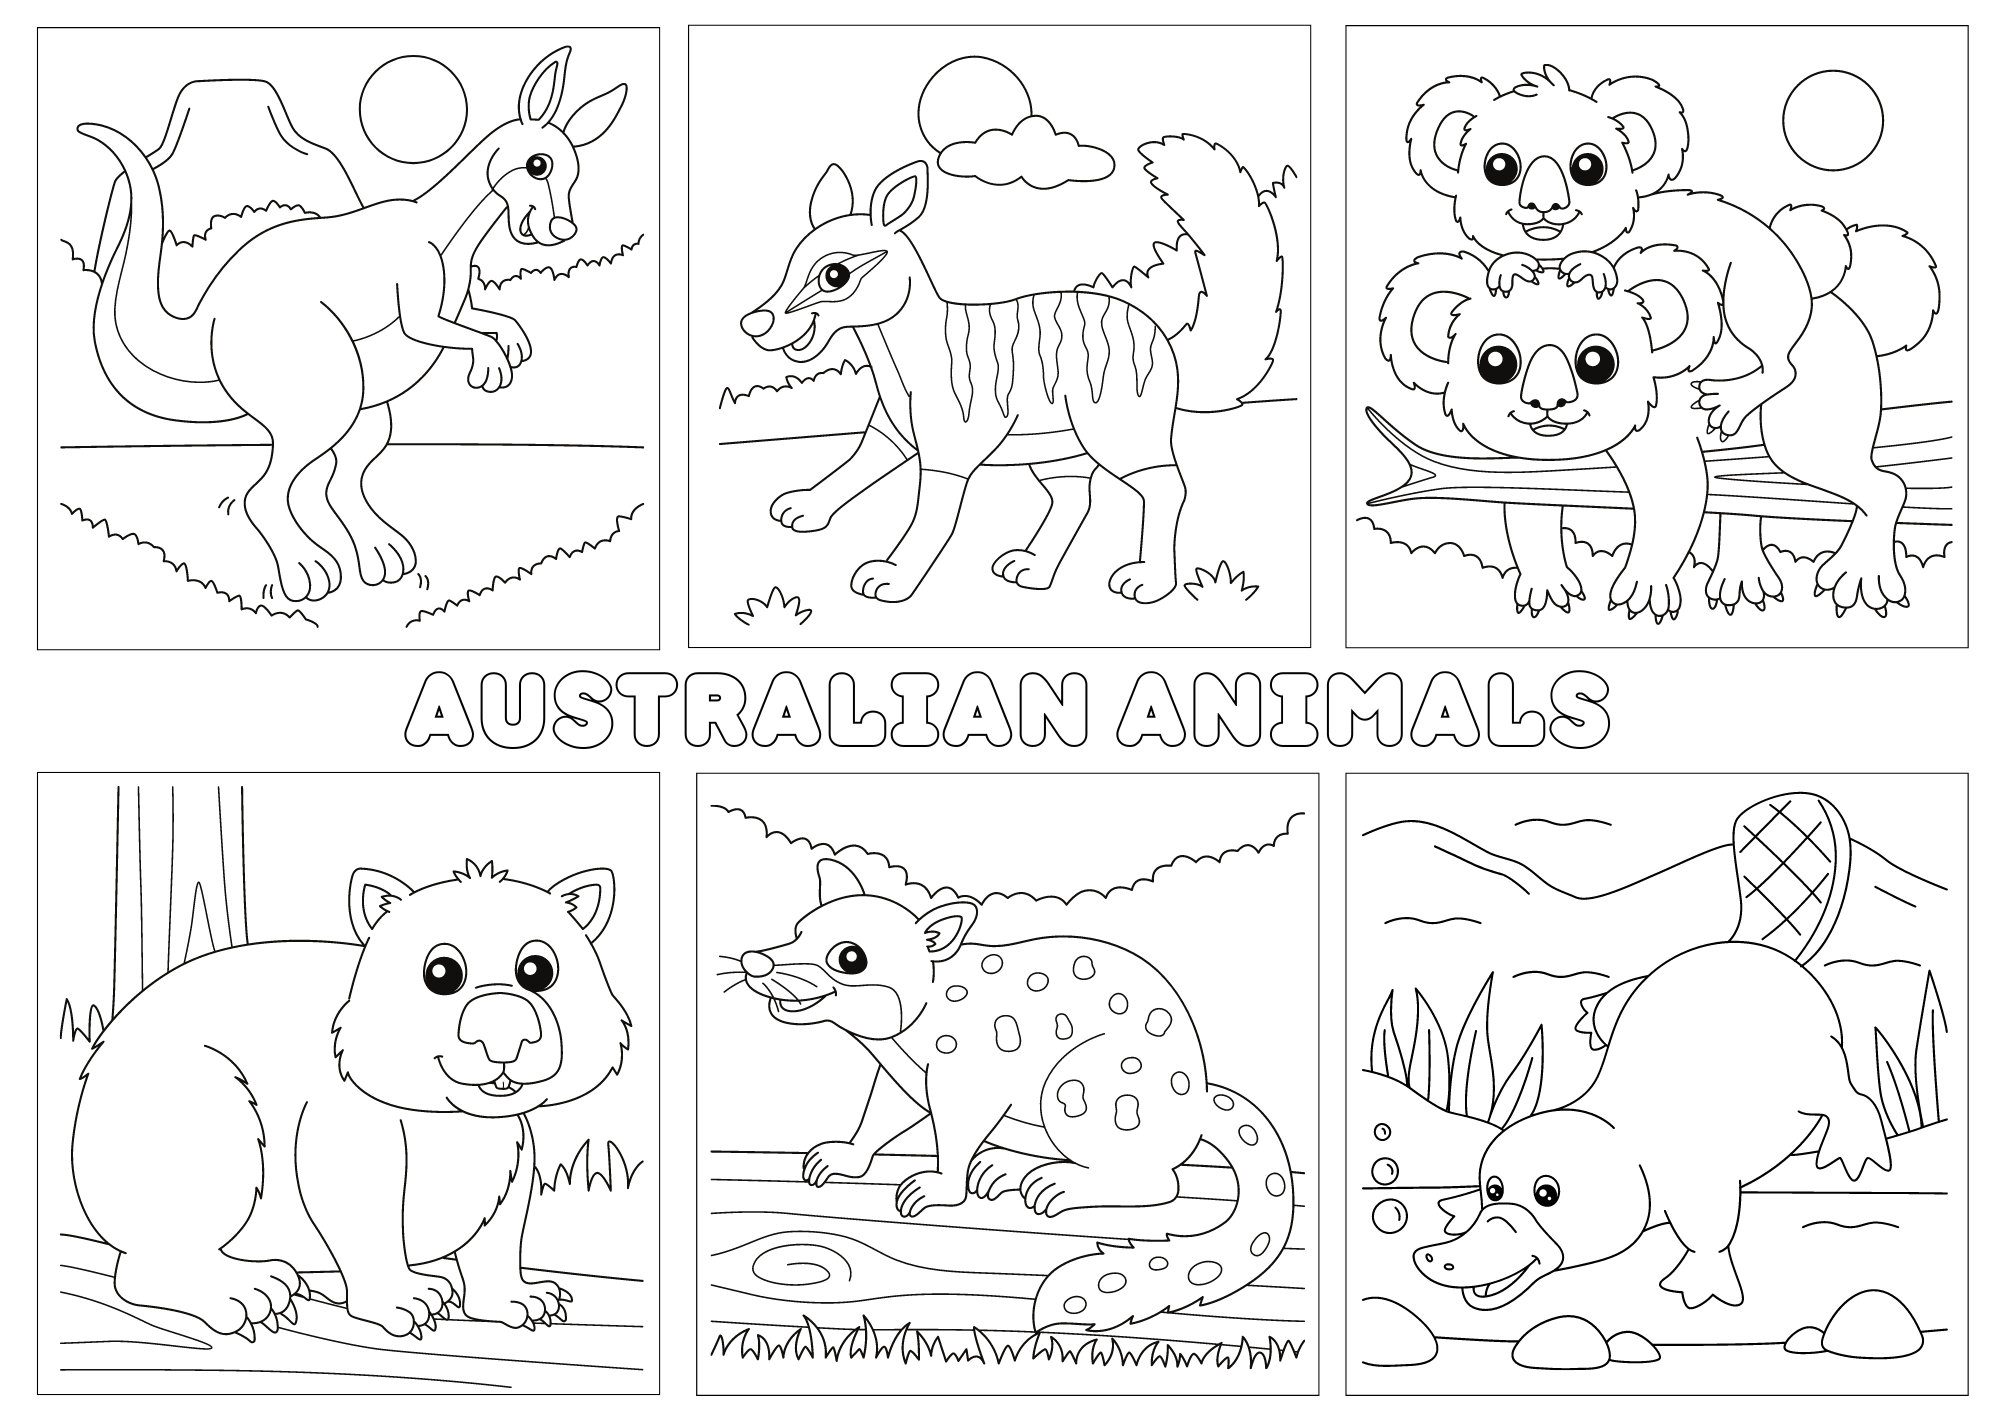 Native australian animals coloring pages australian animals printables australia mammals marsupials coloring coloring printables